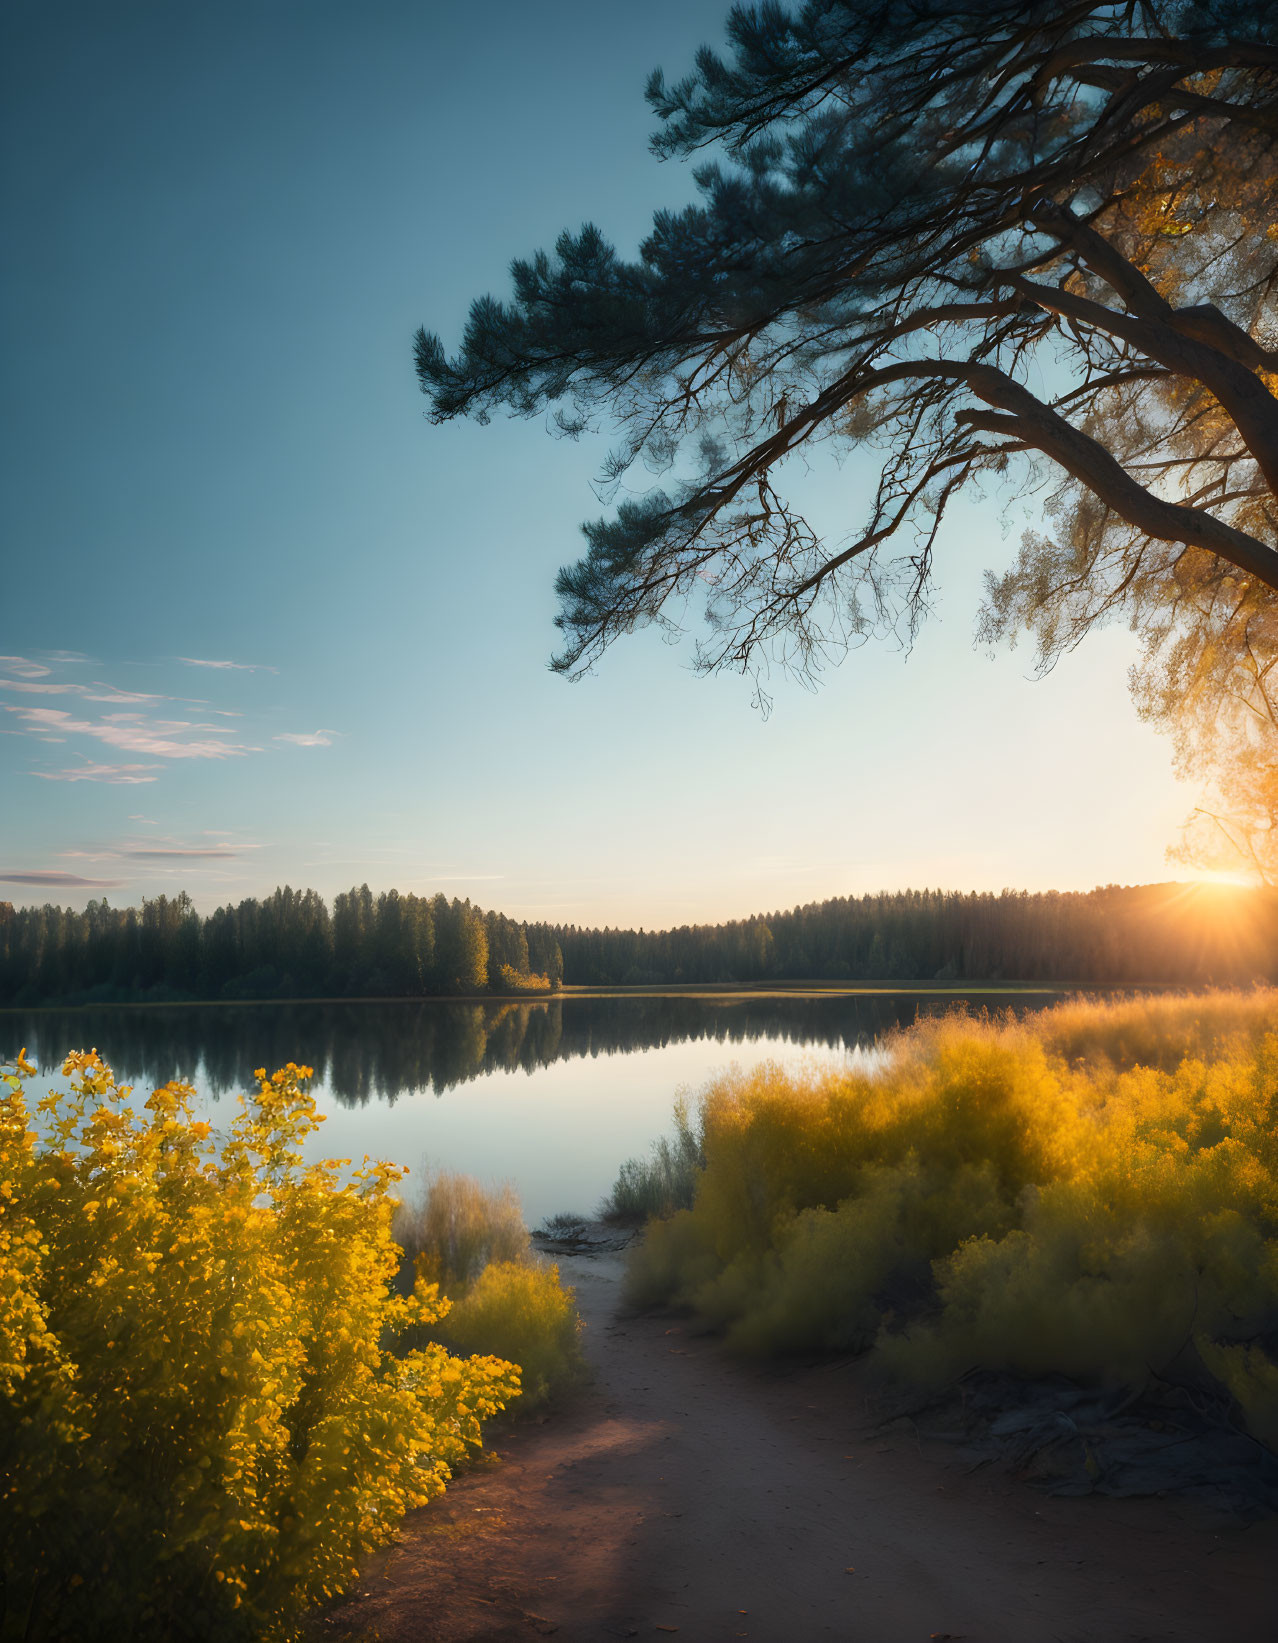 Tranquil sunrise scene with lake, yellow flowers, and pine branches